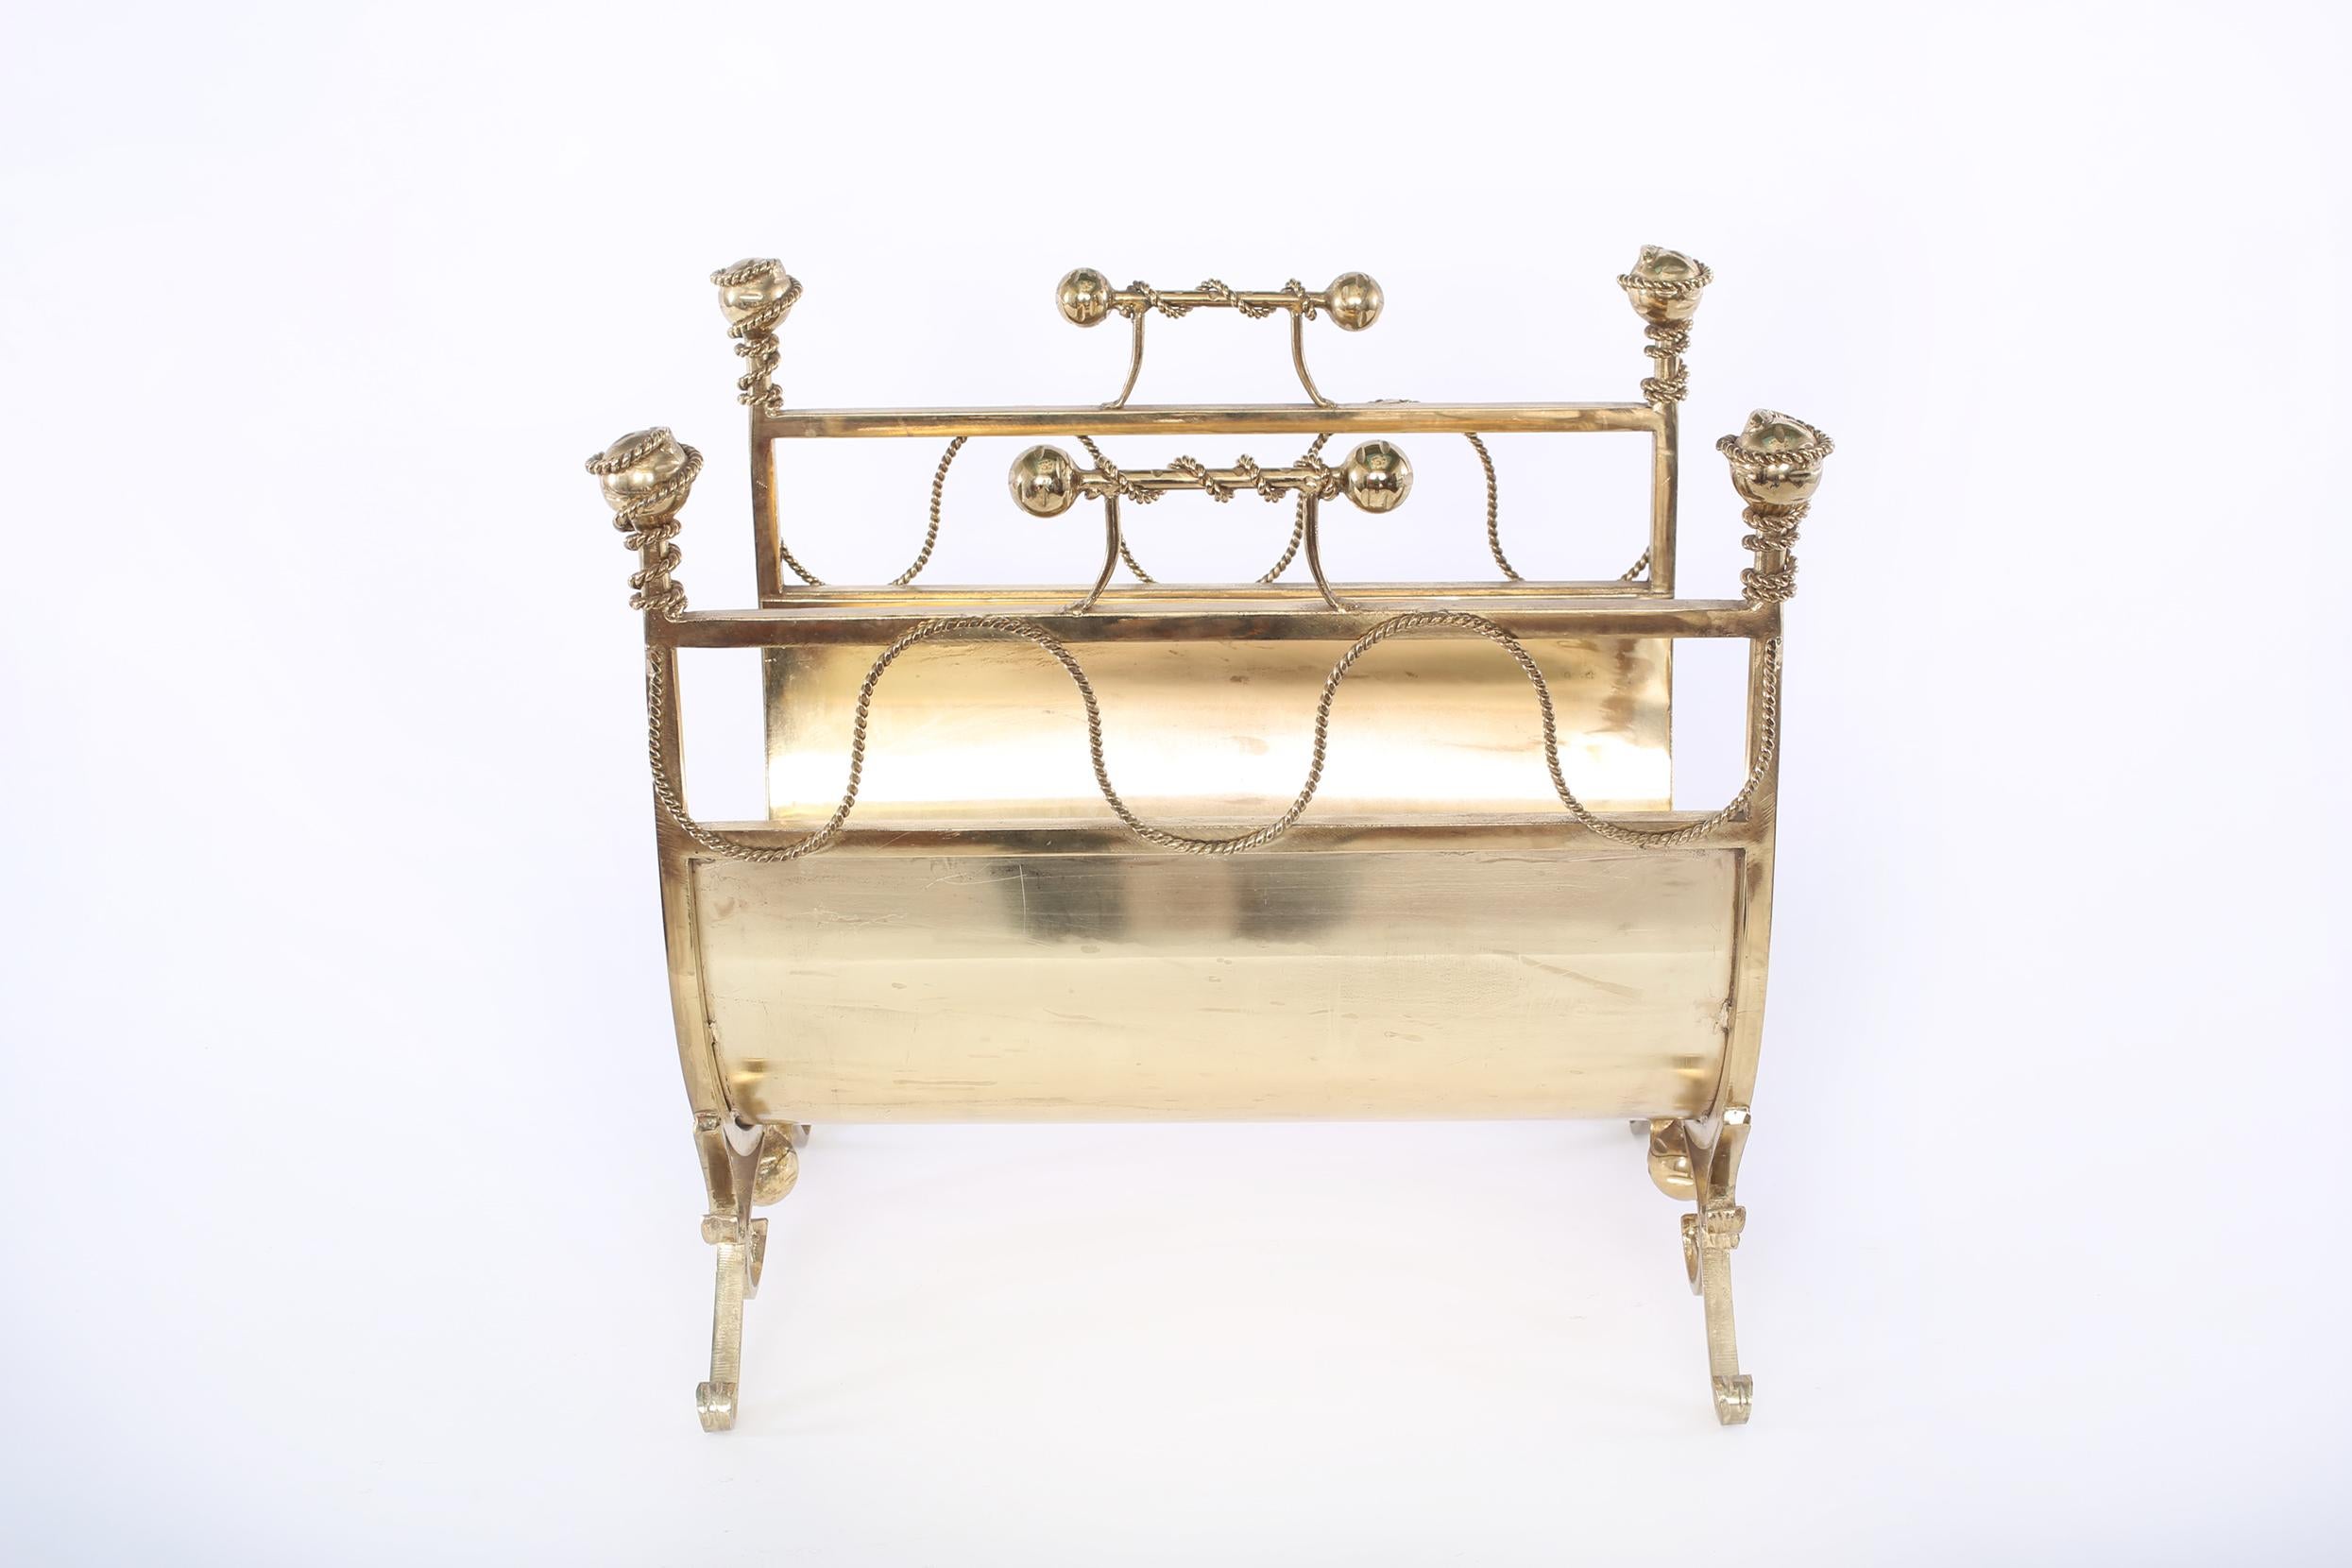 Italian footed solid brass fire logs holder with top handles & exterior design details. The logs holder stand about 17 inches high x 13 inches deep x 19 inches wide.